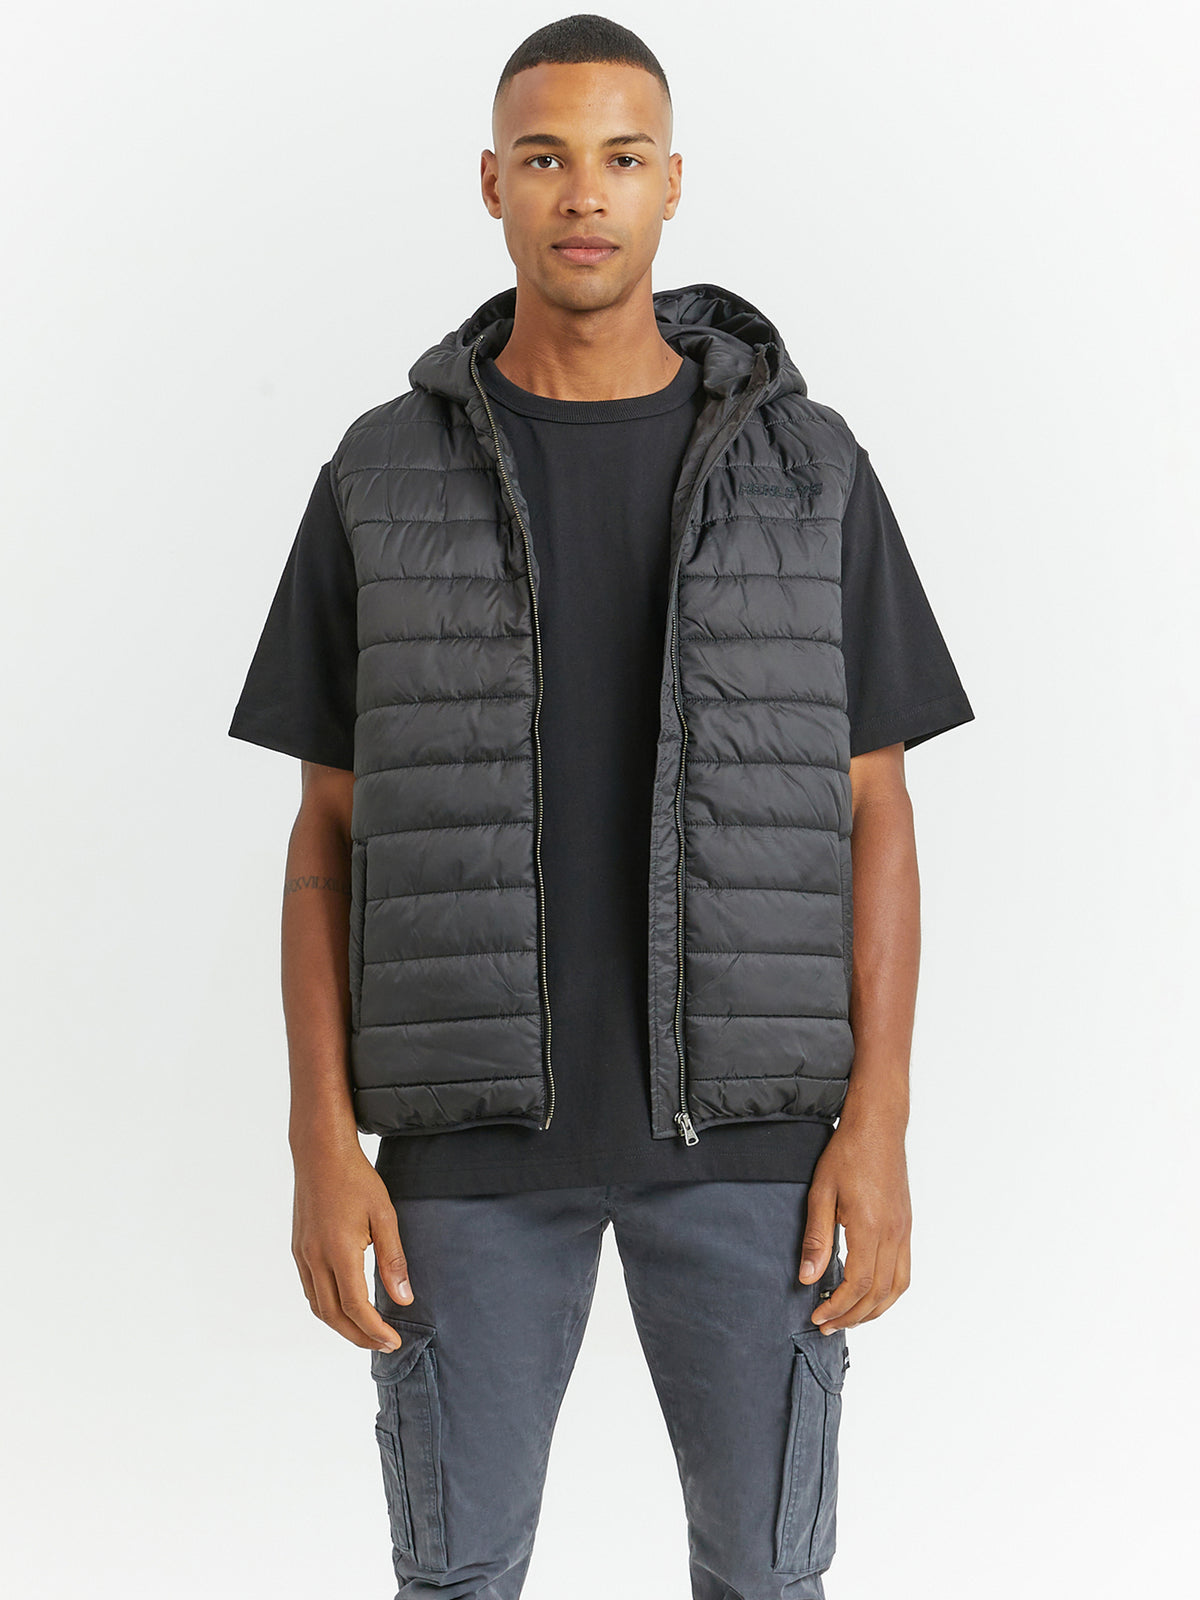 Velocity Hooded Gillet